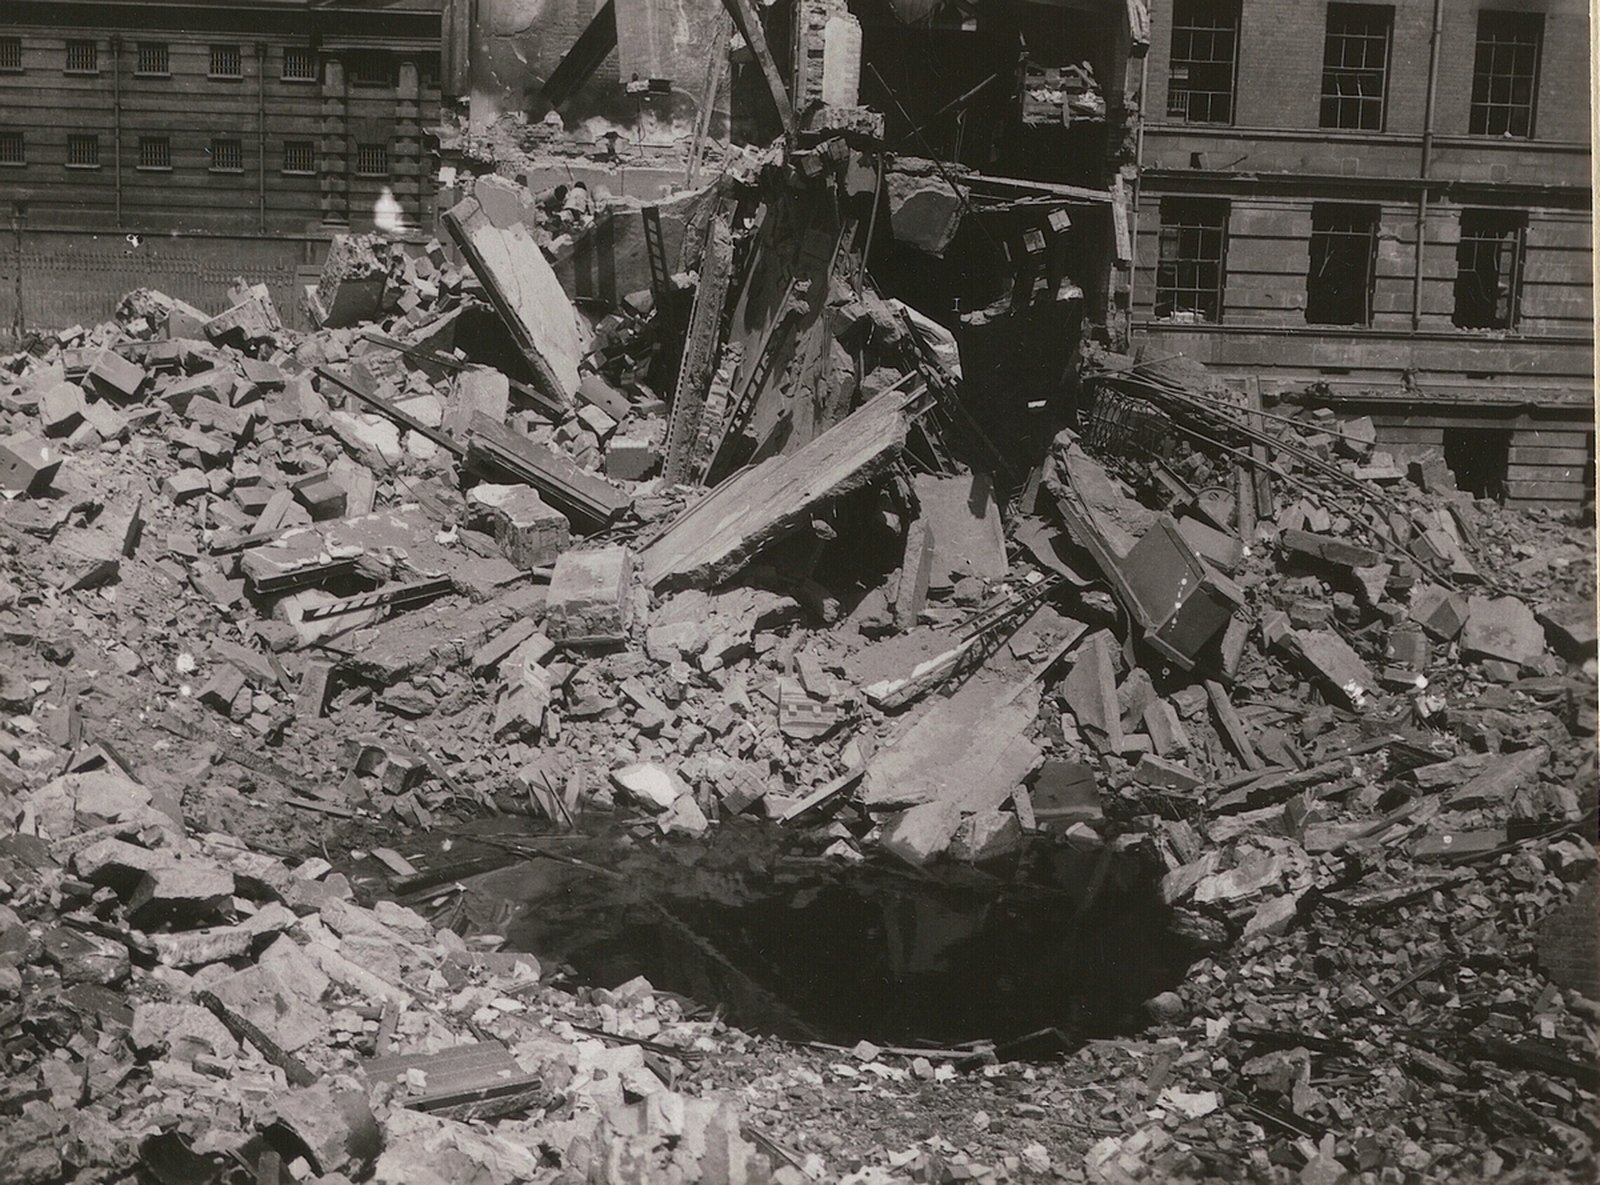 Image - The crater left by the massive explosion (Credit: The Irish Architectural Archive)